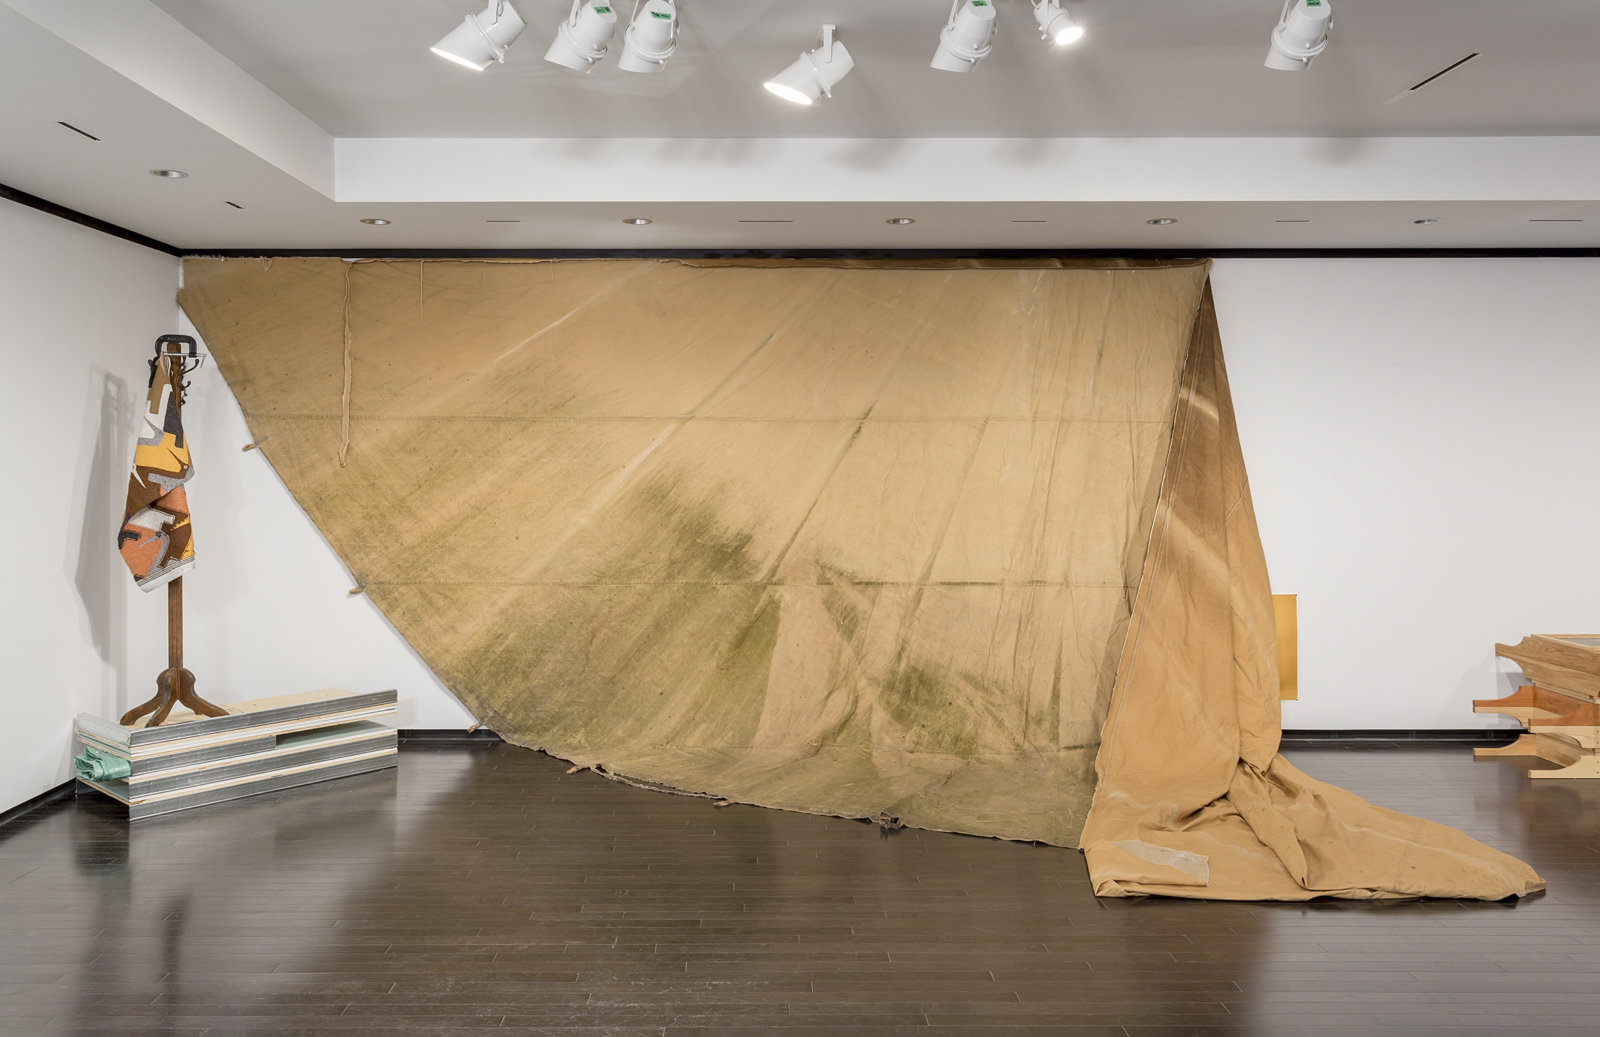 Duane Linklater, a gift from Doreen, 2016, tipi canvas, nails, dimensions variable. Installation view, A Parallel Excavation, Art Gallery of Alberta, Edmonton, Canada, 2016